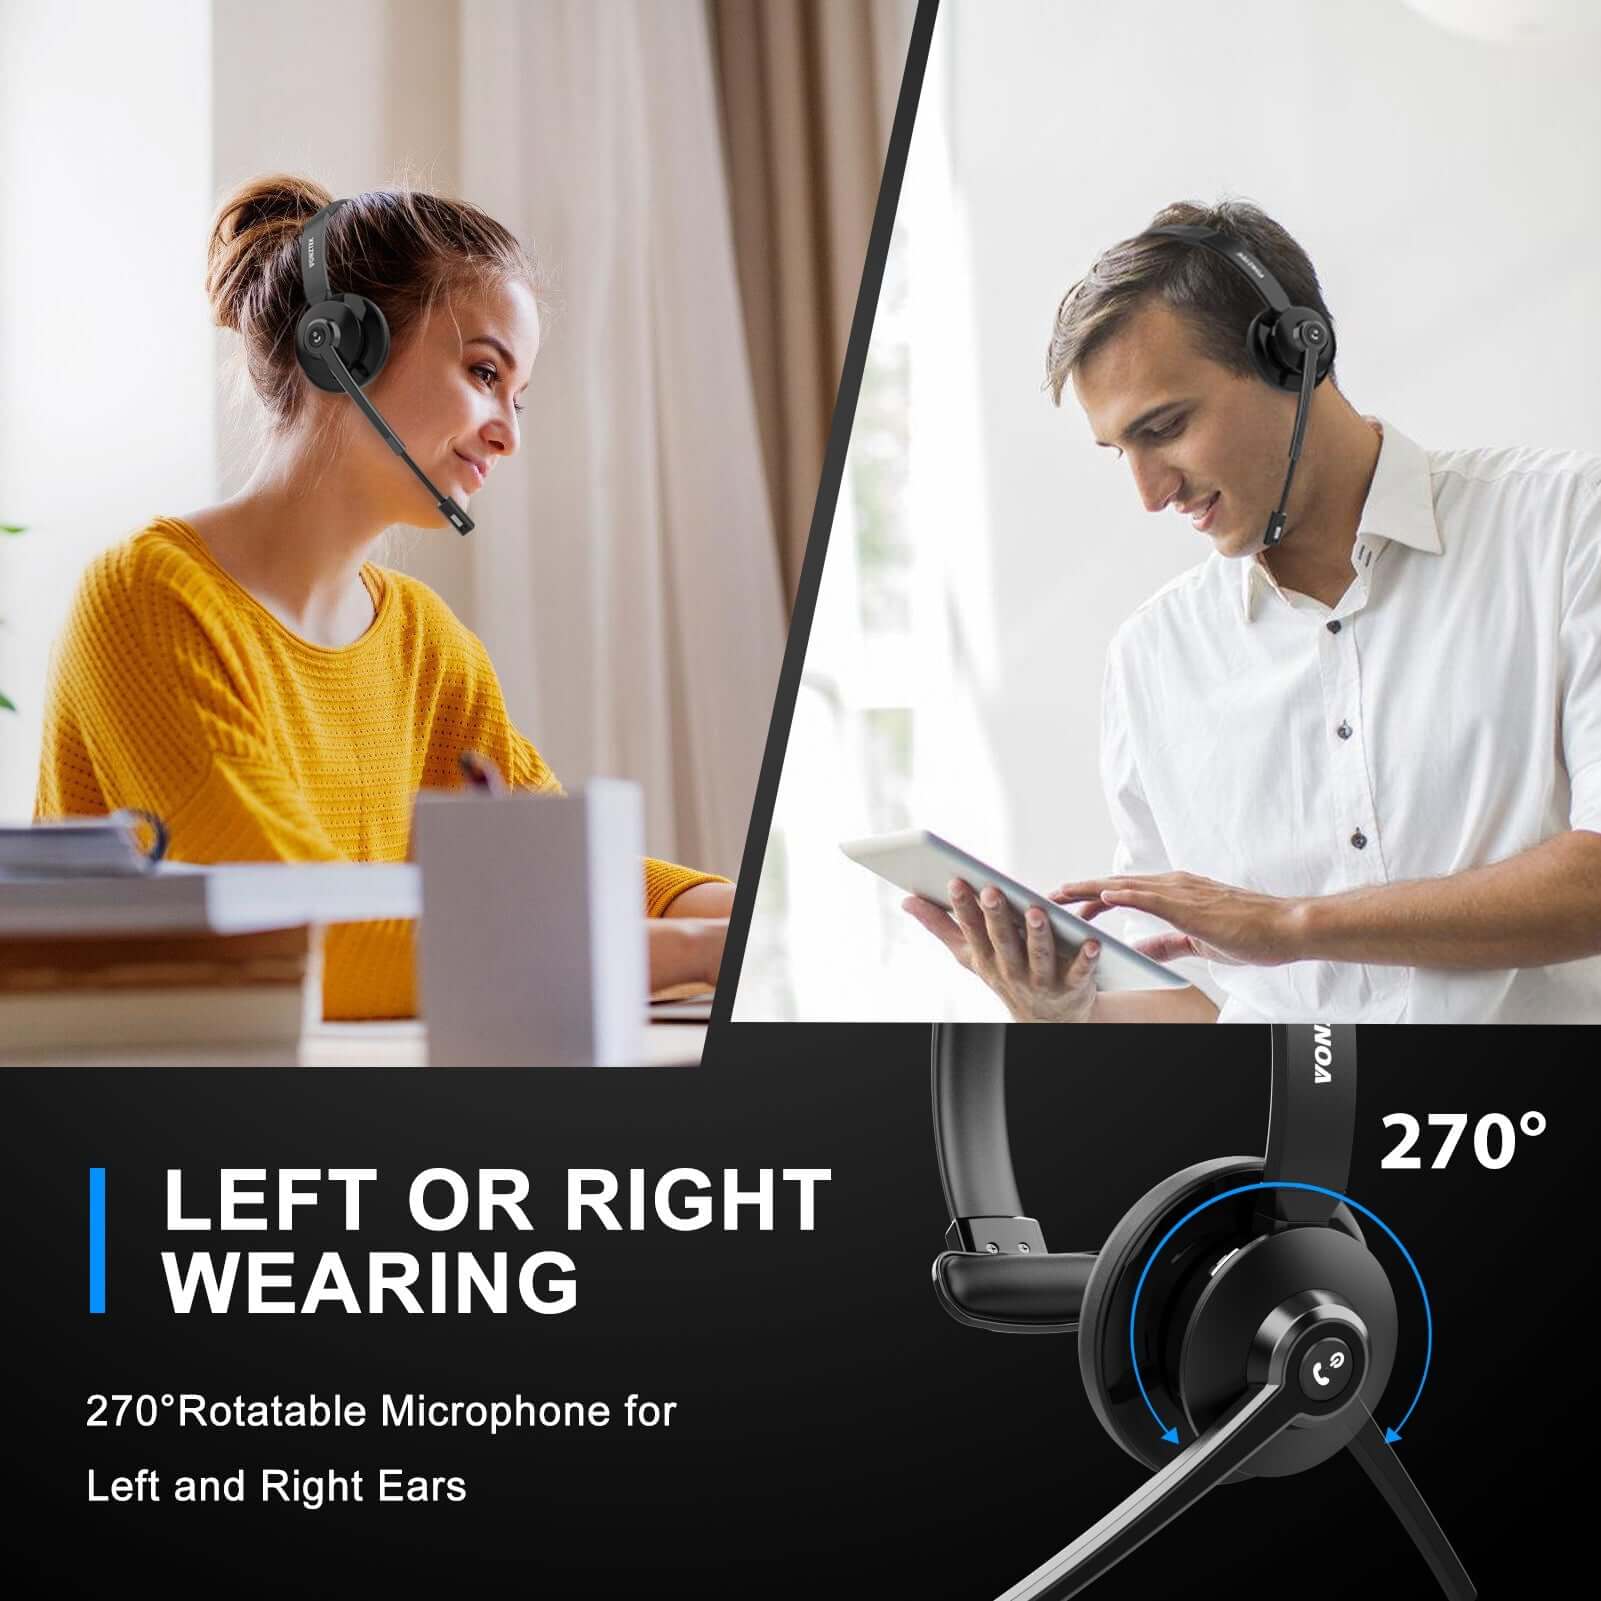 Left or right wearing,270° Rotatable microphone for left and right ears.